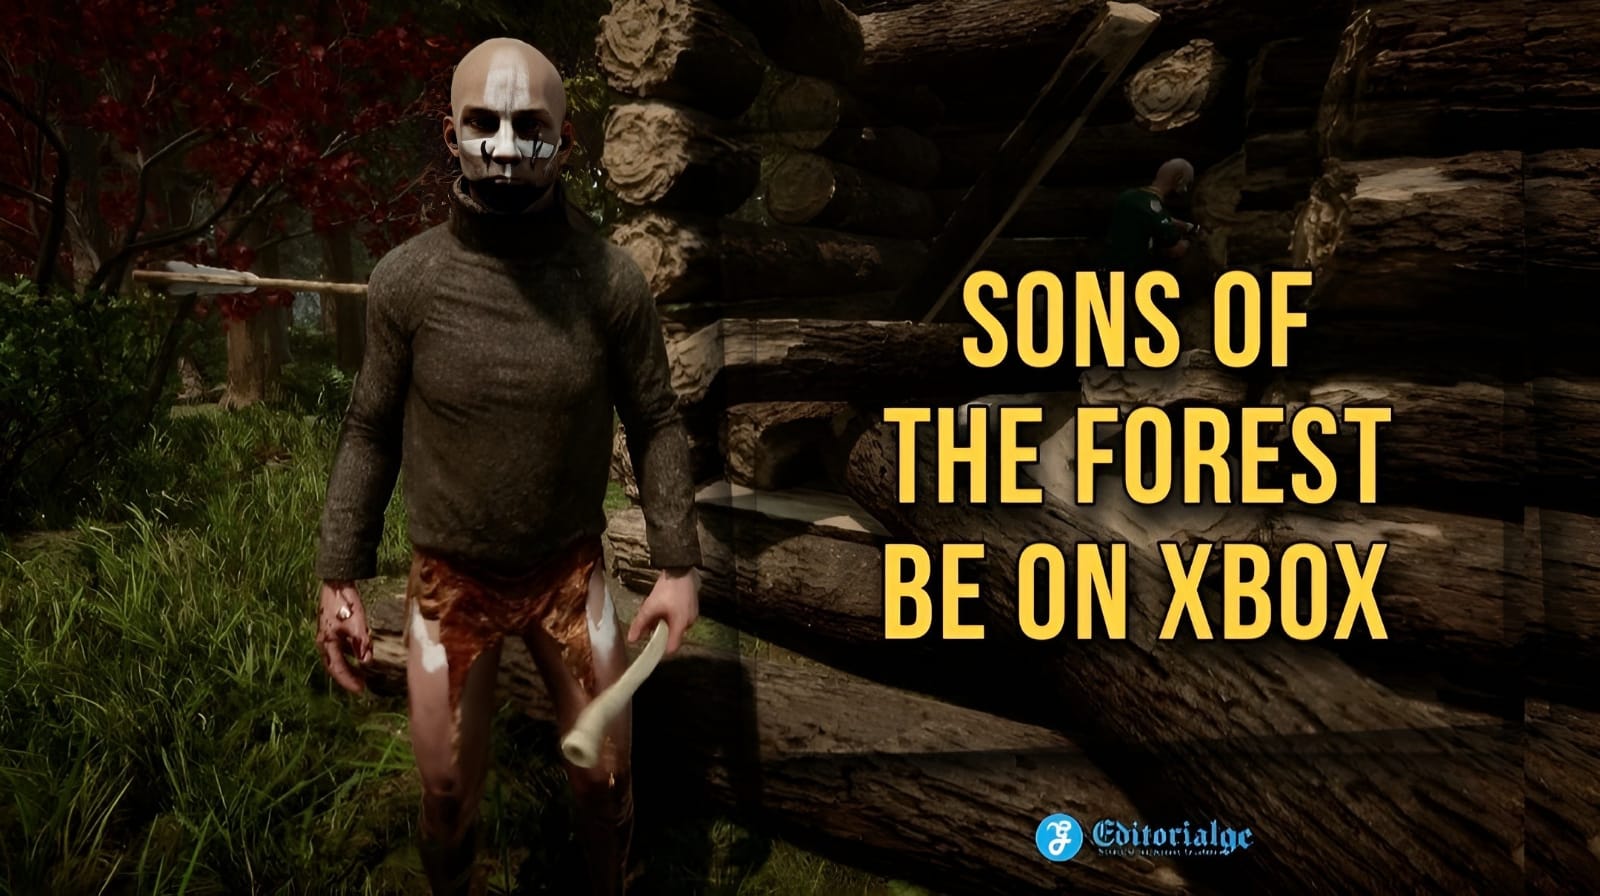 Will Sons of the Forest be on Xbox?